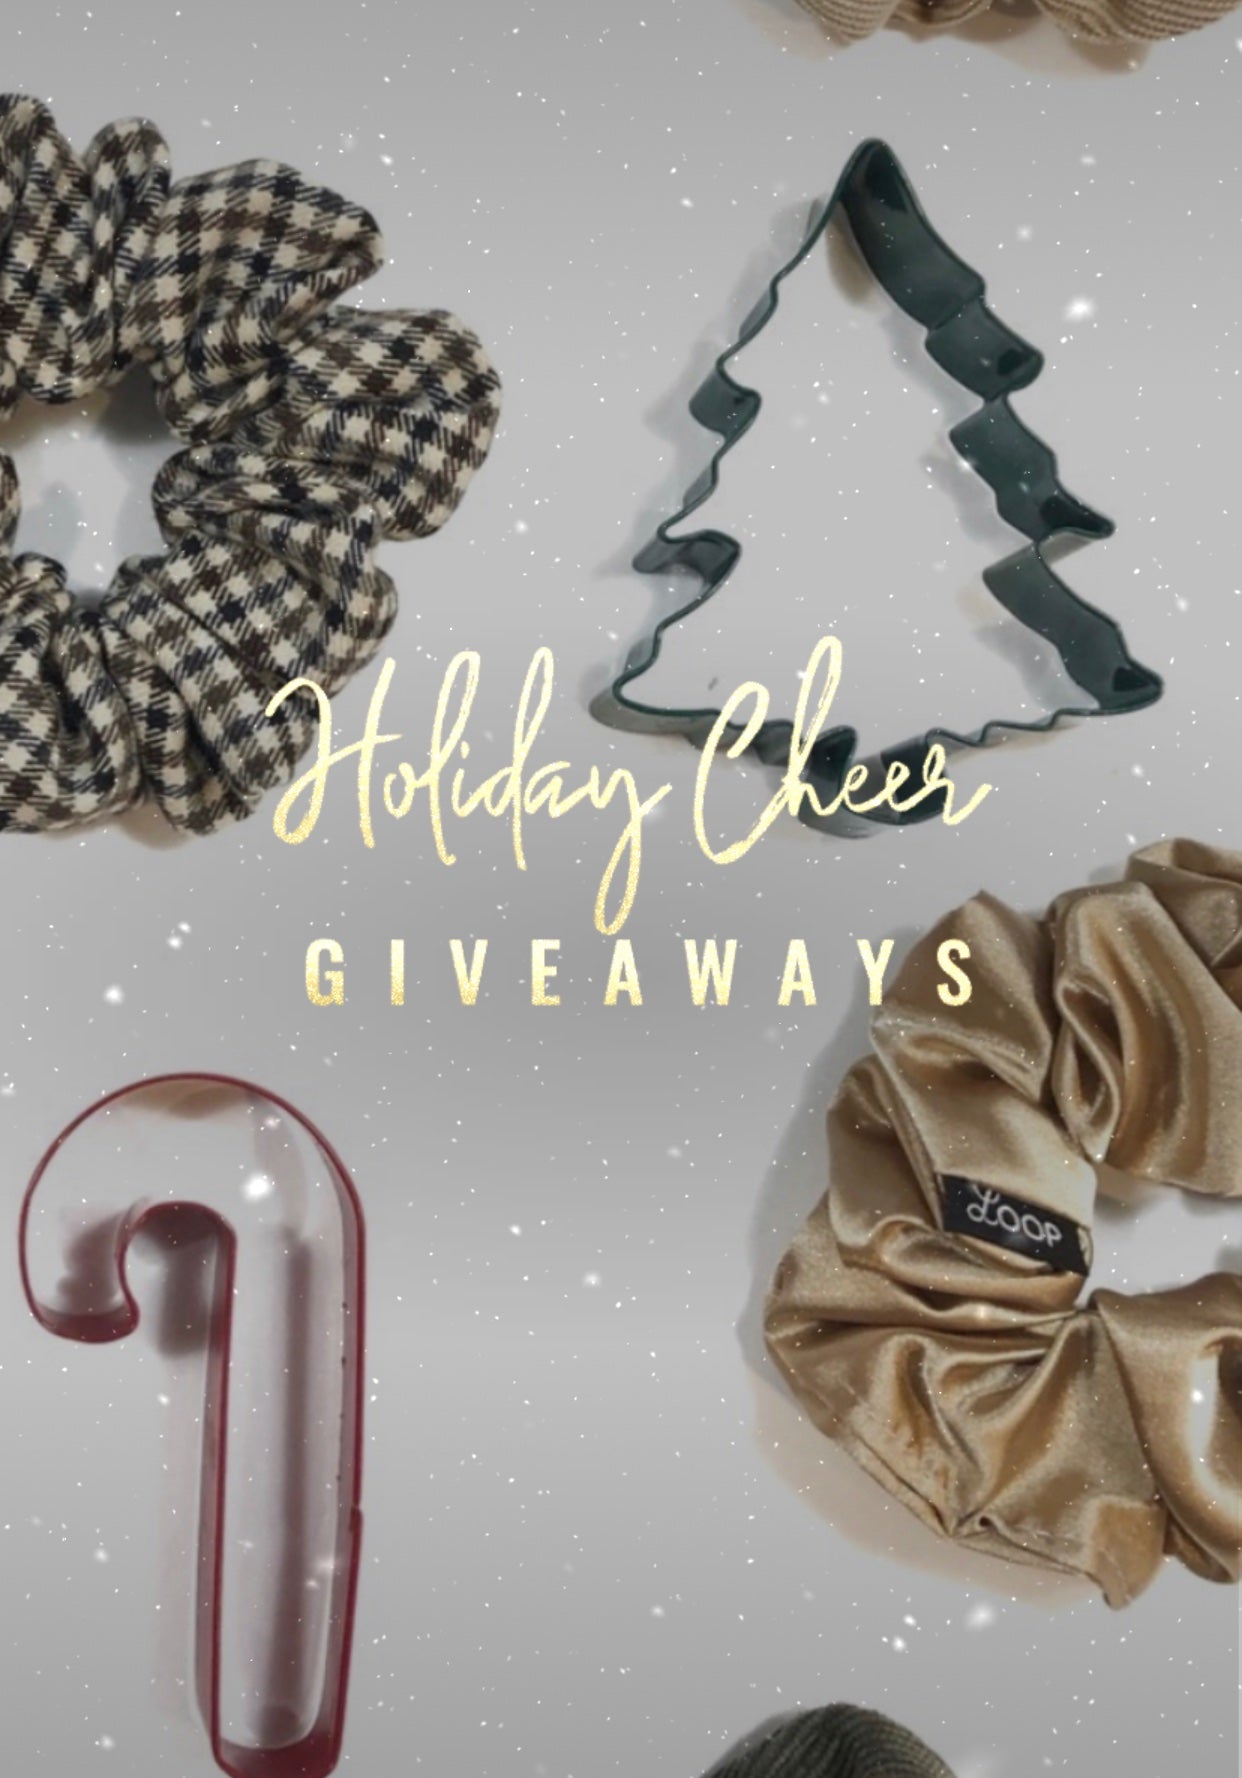 LOOP's Eight Days of Holiday Cheer Giveaways !